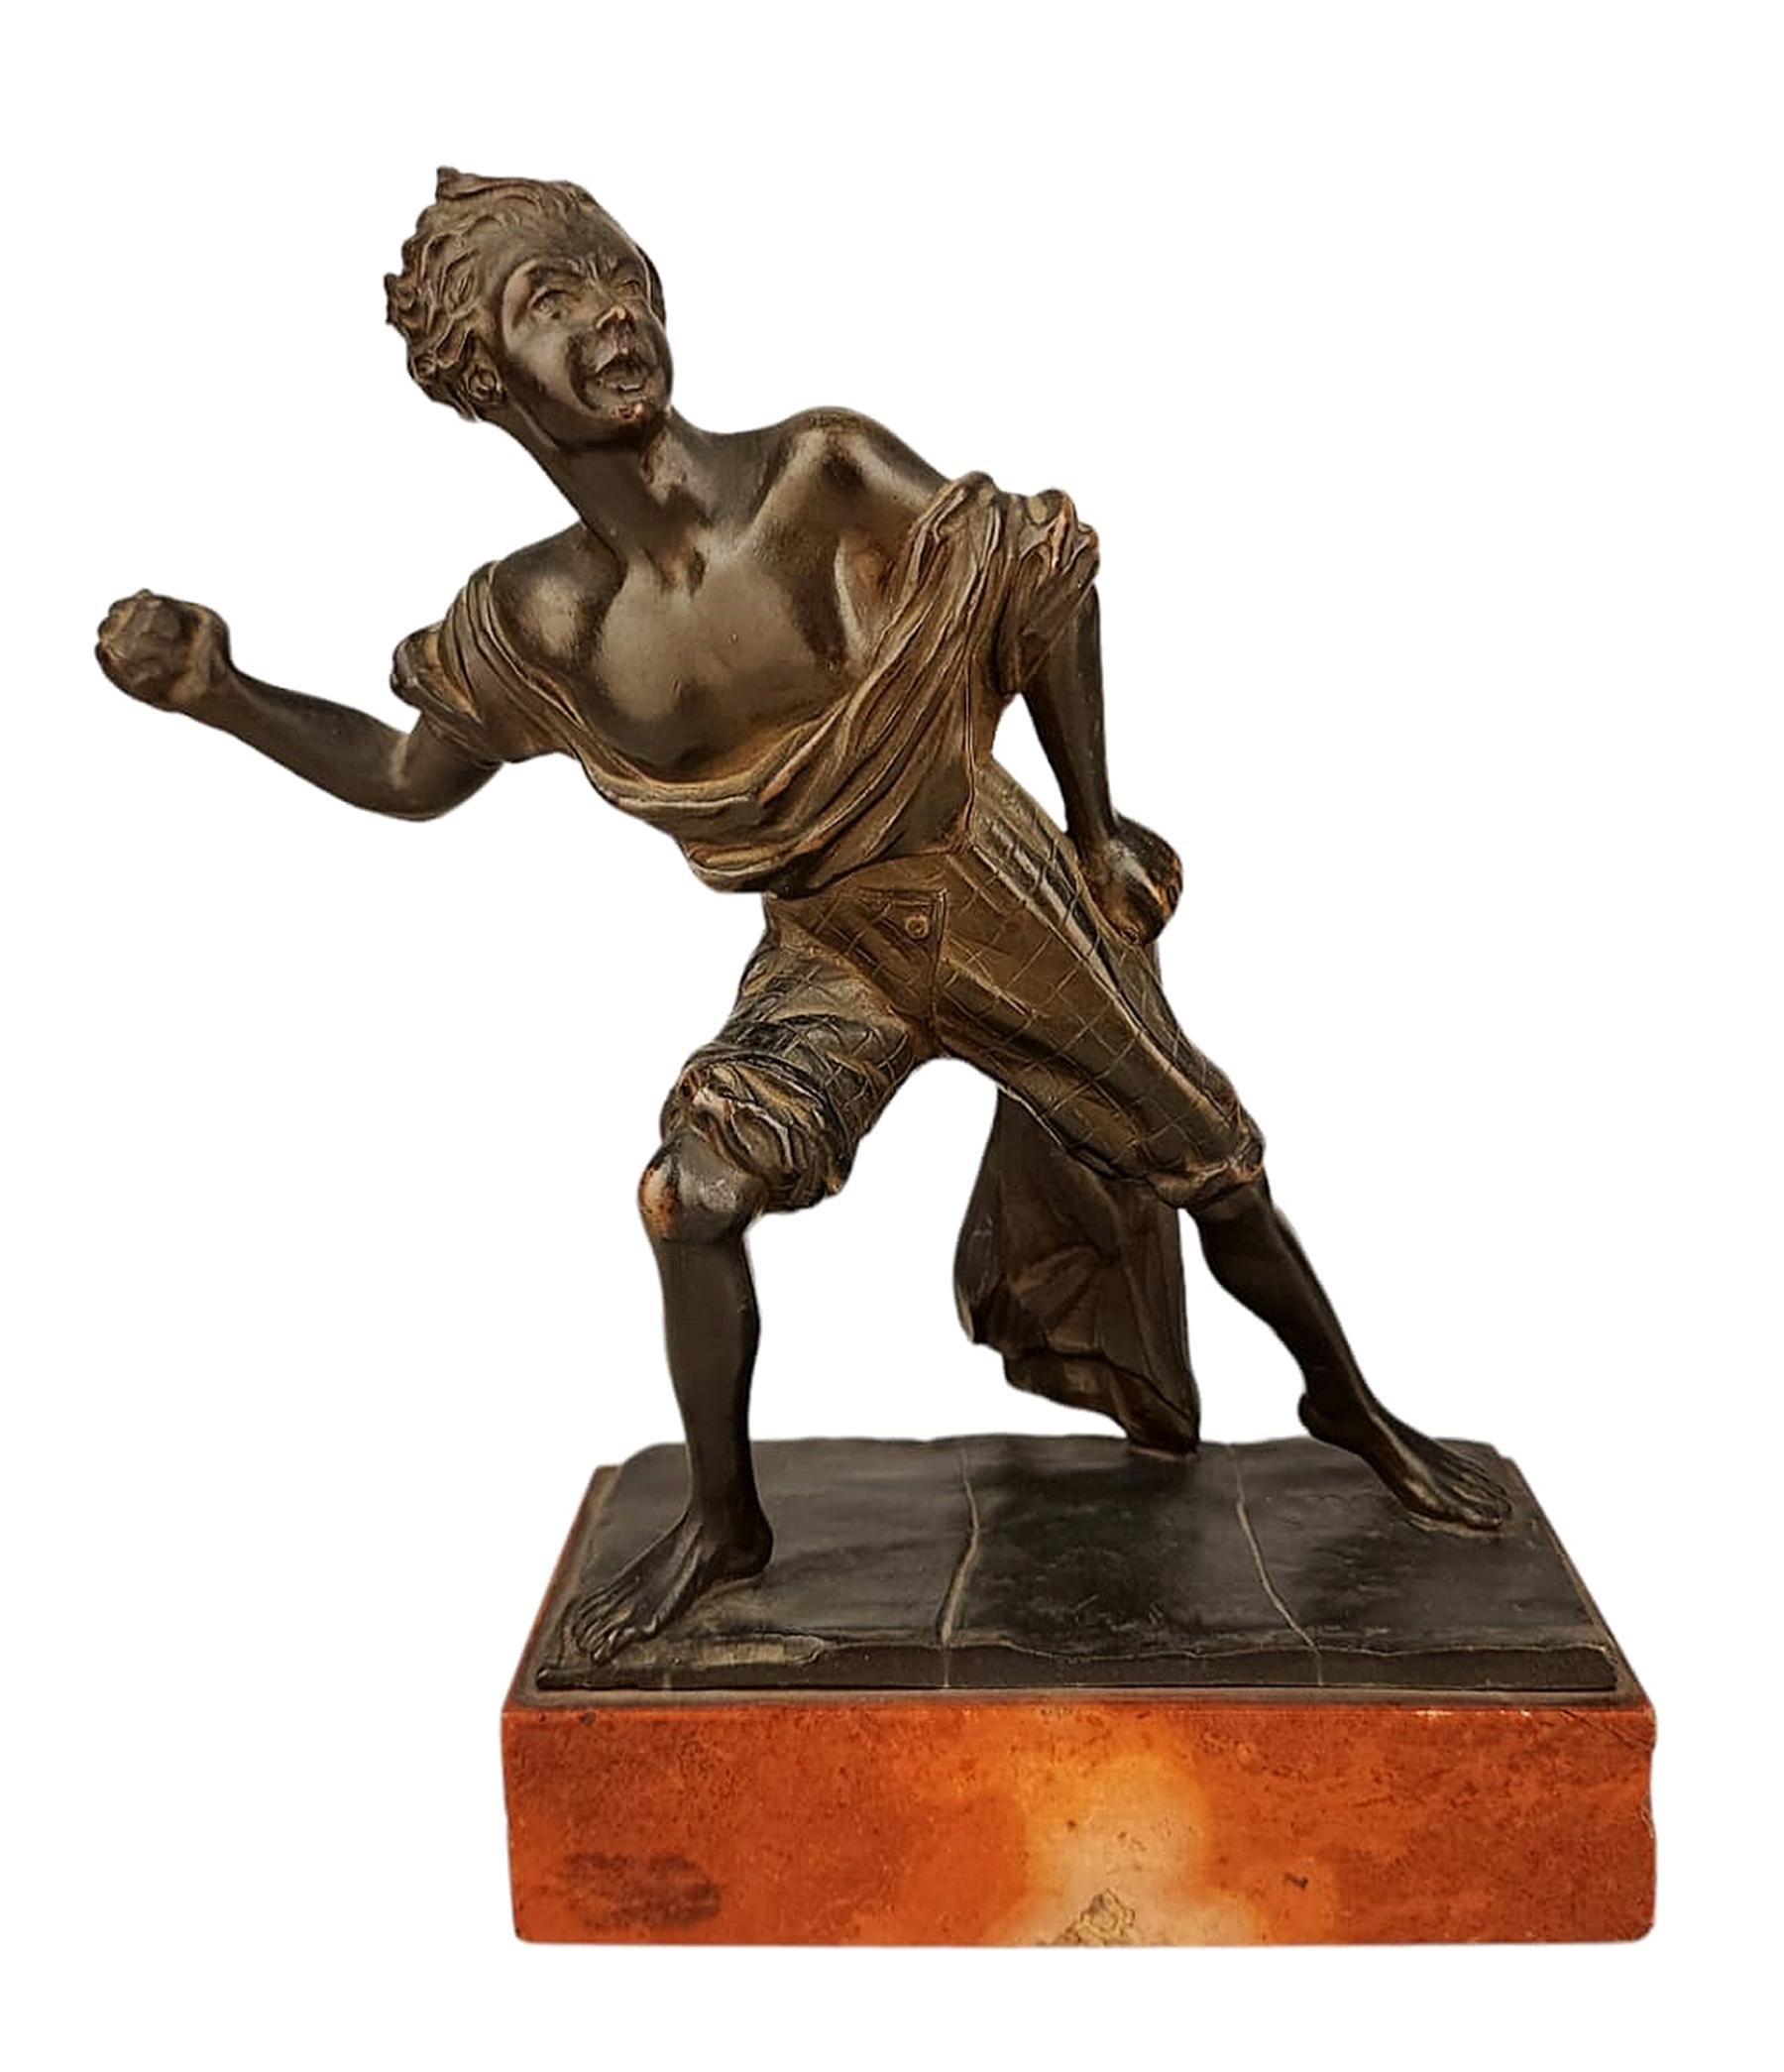 Early 20th century italian bronze sculpture depicting Giambattista Perasso 'Balilla'

By: unknown
Material: bronze, copper, metal
Technique: cast, molded, polished, metalwork
Dimensions: 3 in x 5.5 in x 9 in
Date: early 20th century,